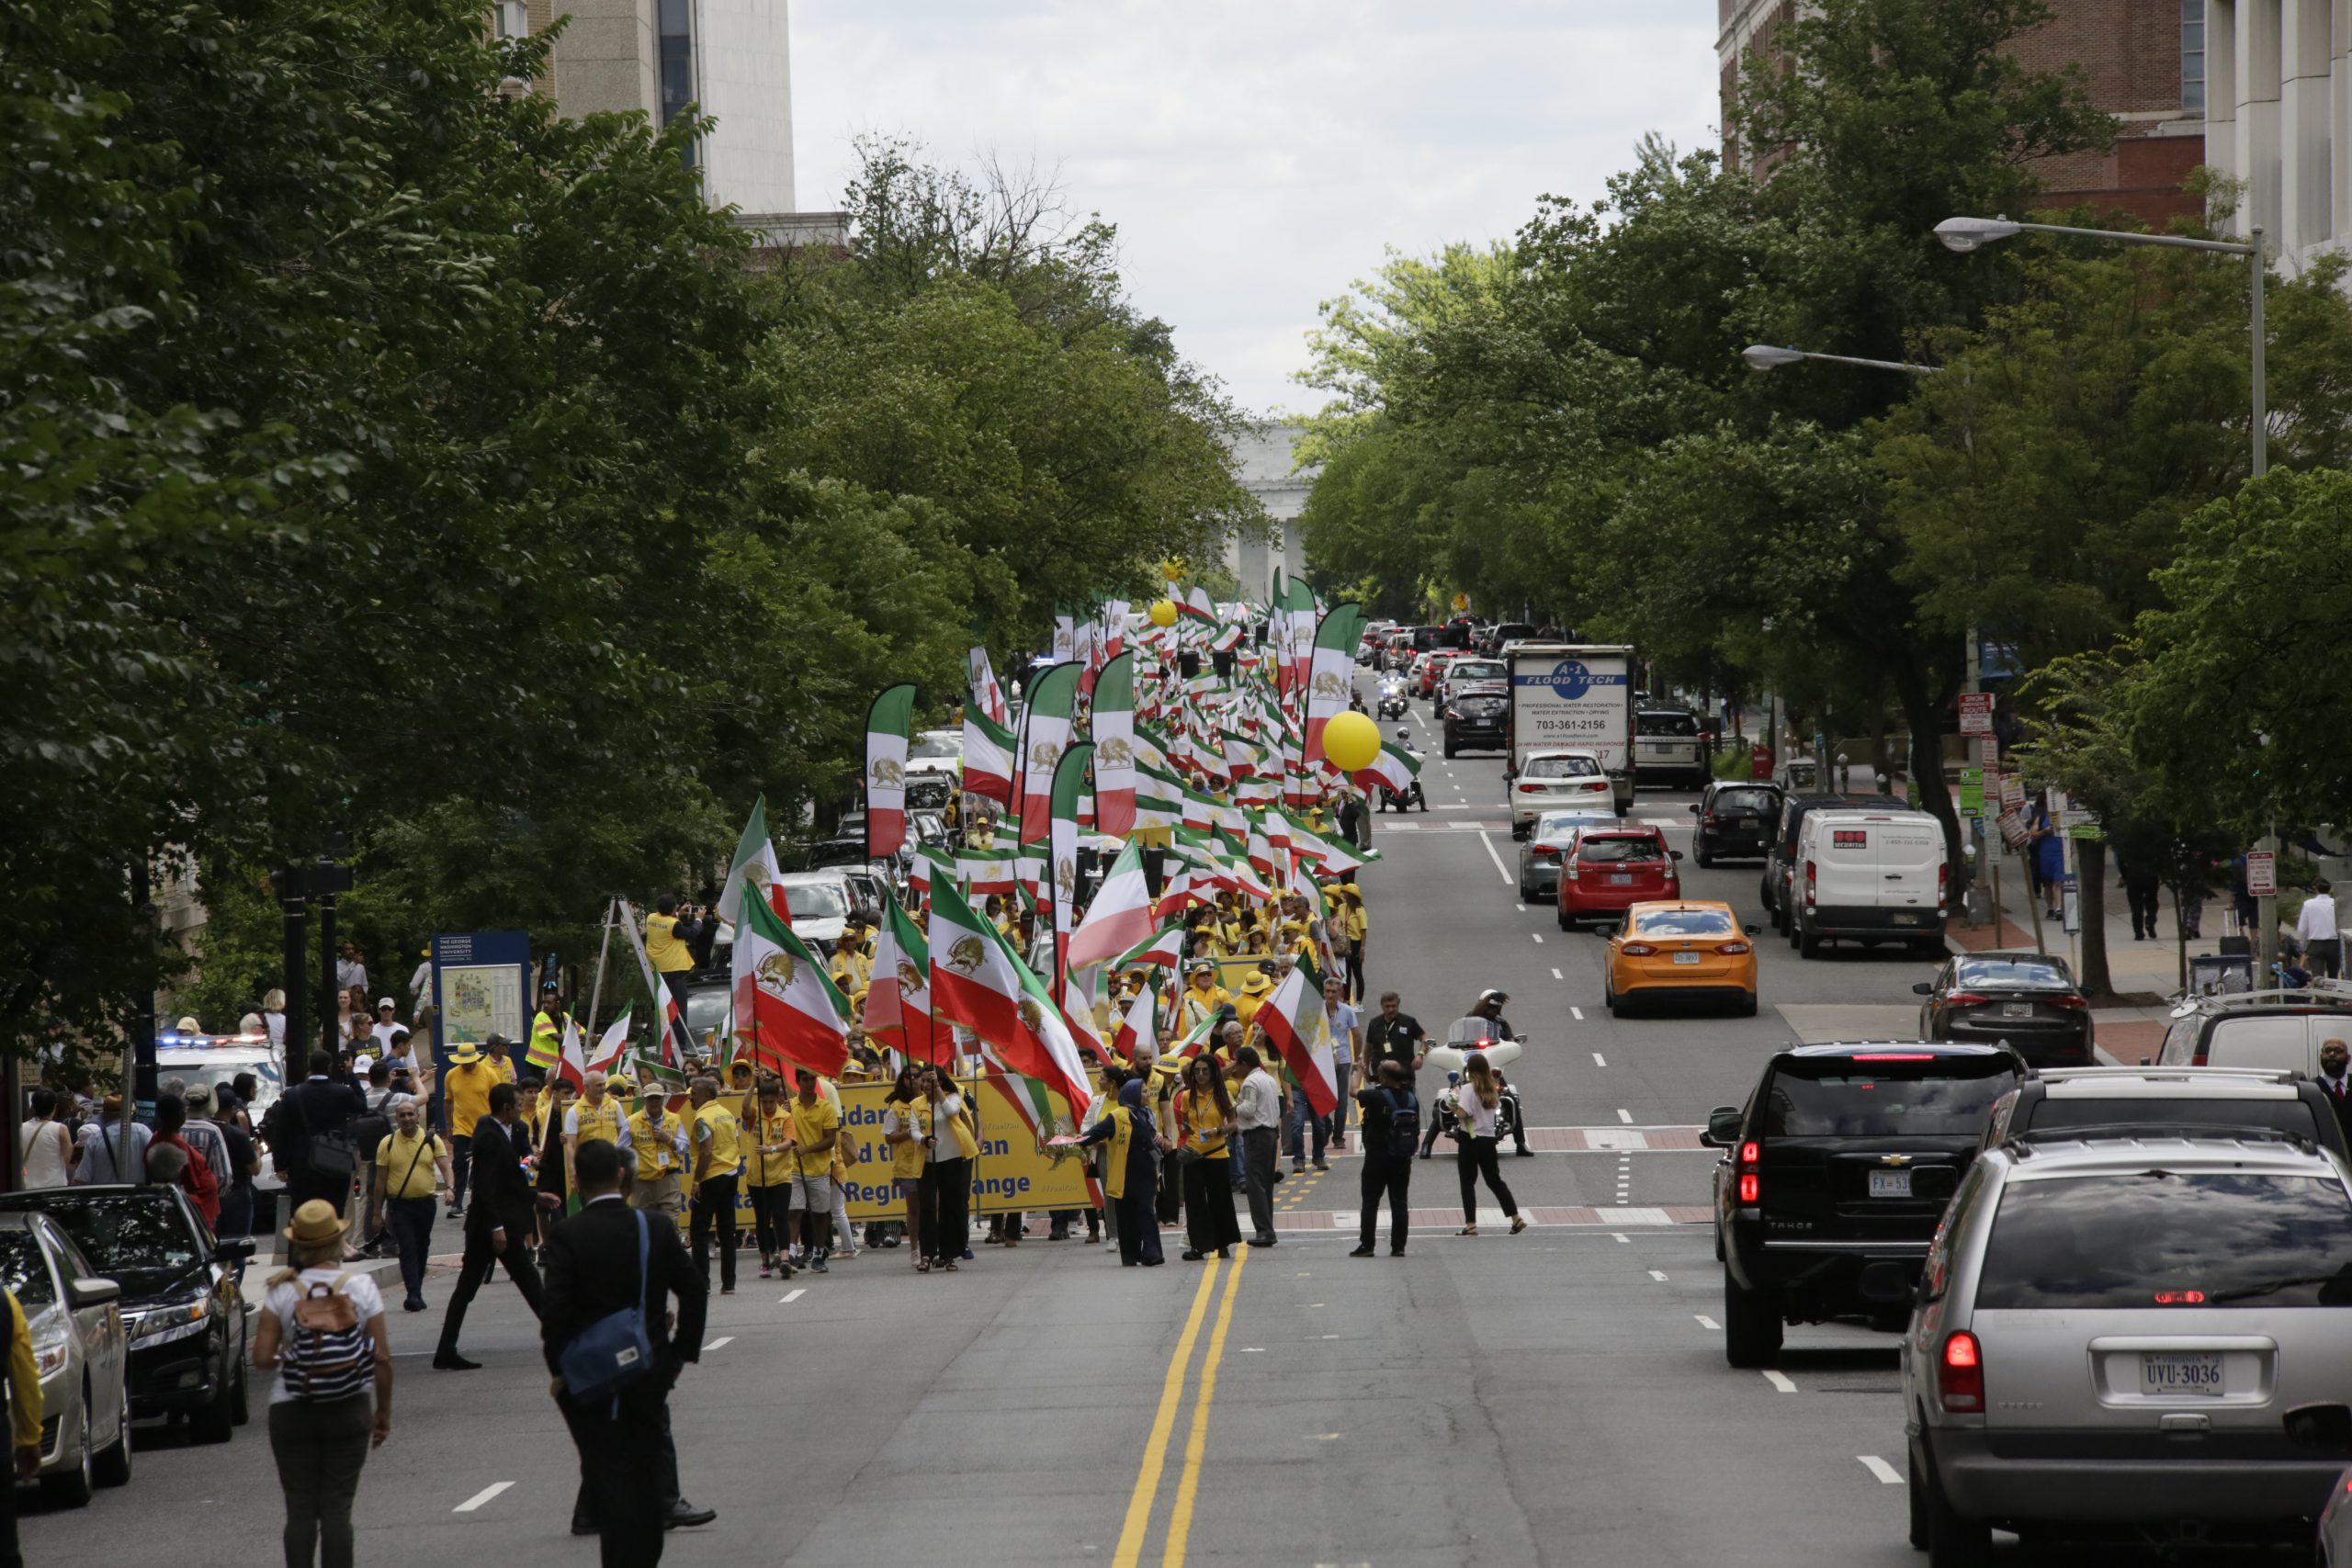 Free Iran Rally - Washington D.C.- June 21, 2019- Over ten thousand supporters of the National Council of Resistance of Iran (NCRI) demonstrated in support of Iran uprisings for freedom and democracy in Iran